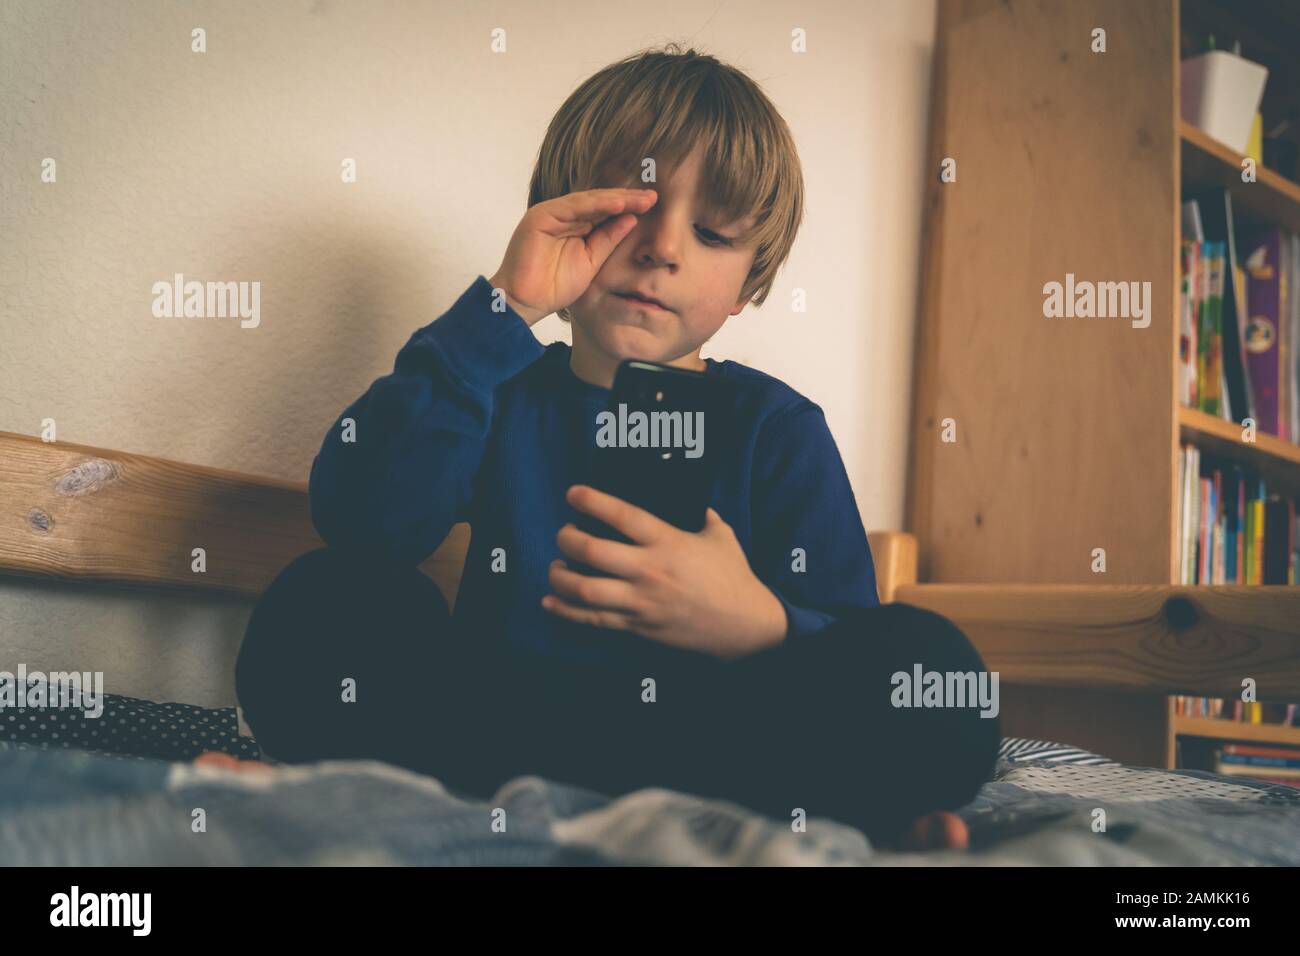 Cyber bullying concept - depressed boy with phone and negative comments Stock Photo